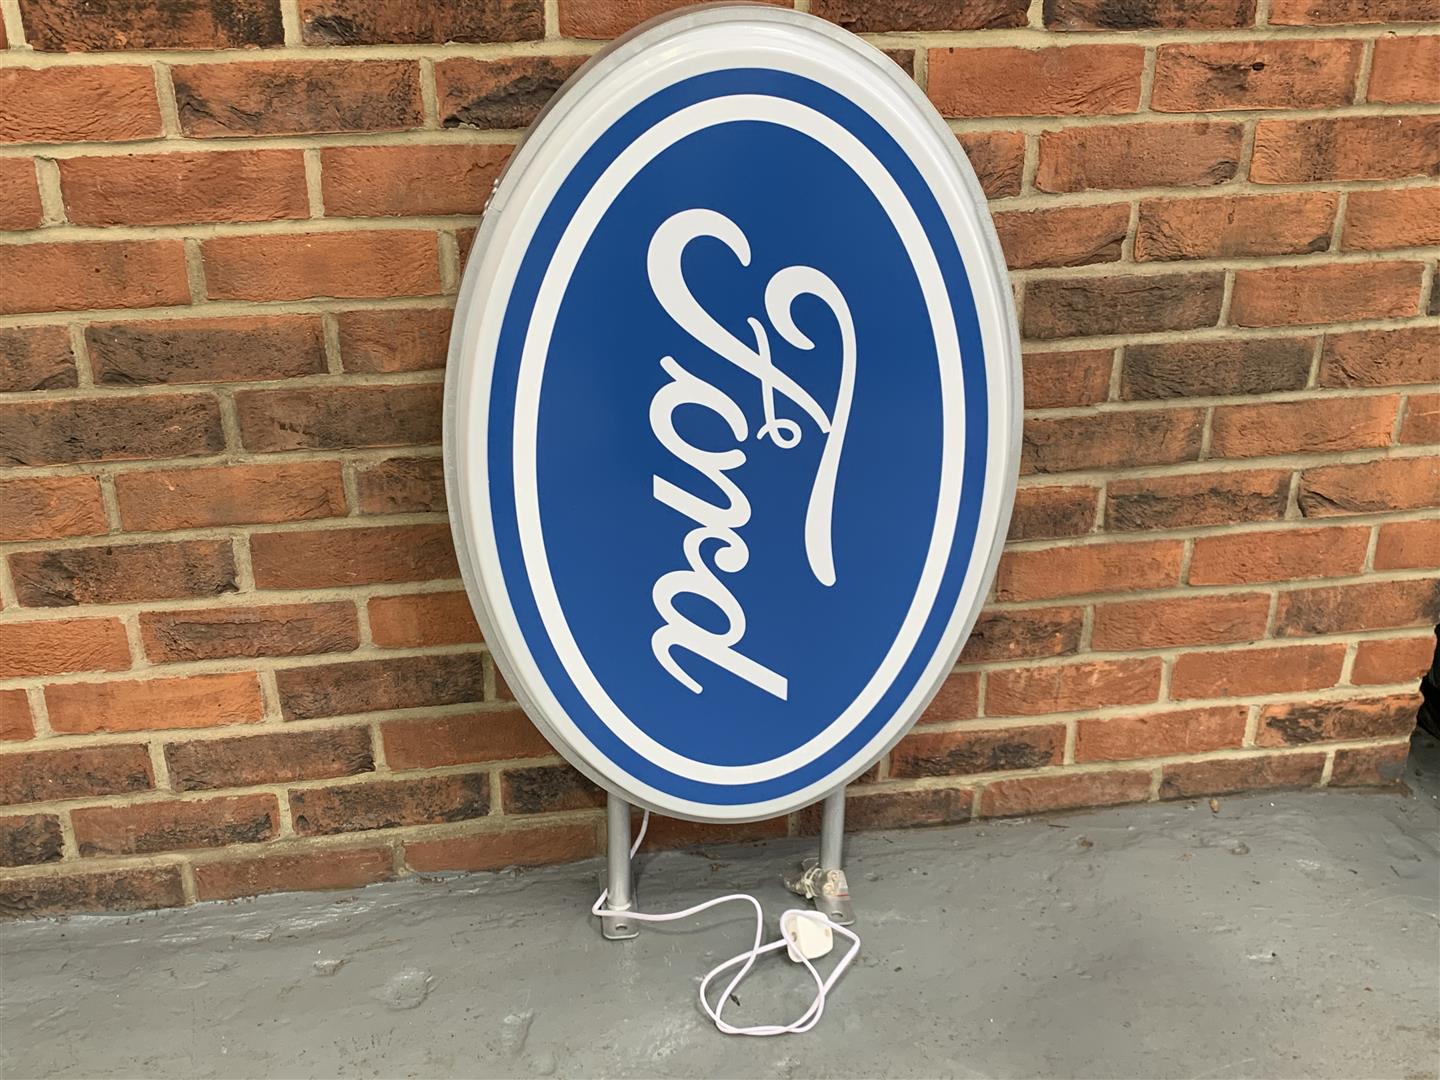 Modern Wall Mounted Oval Illuminated Ford Dealership Sign